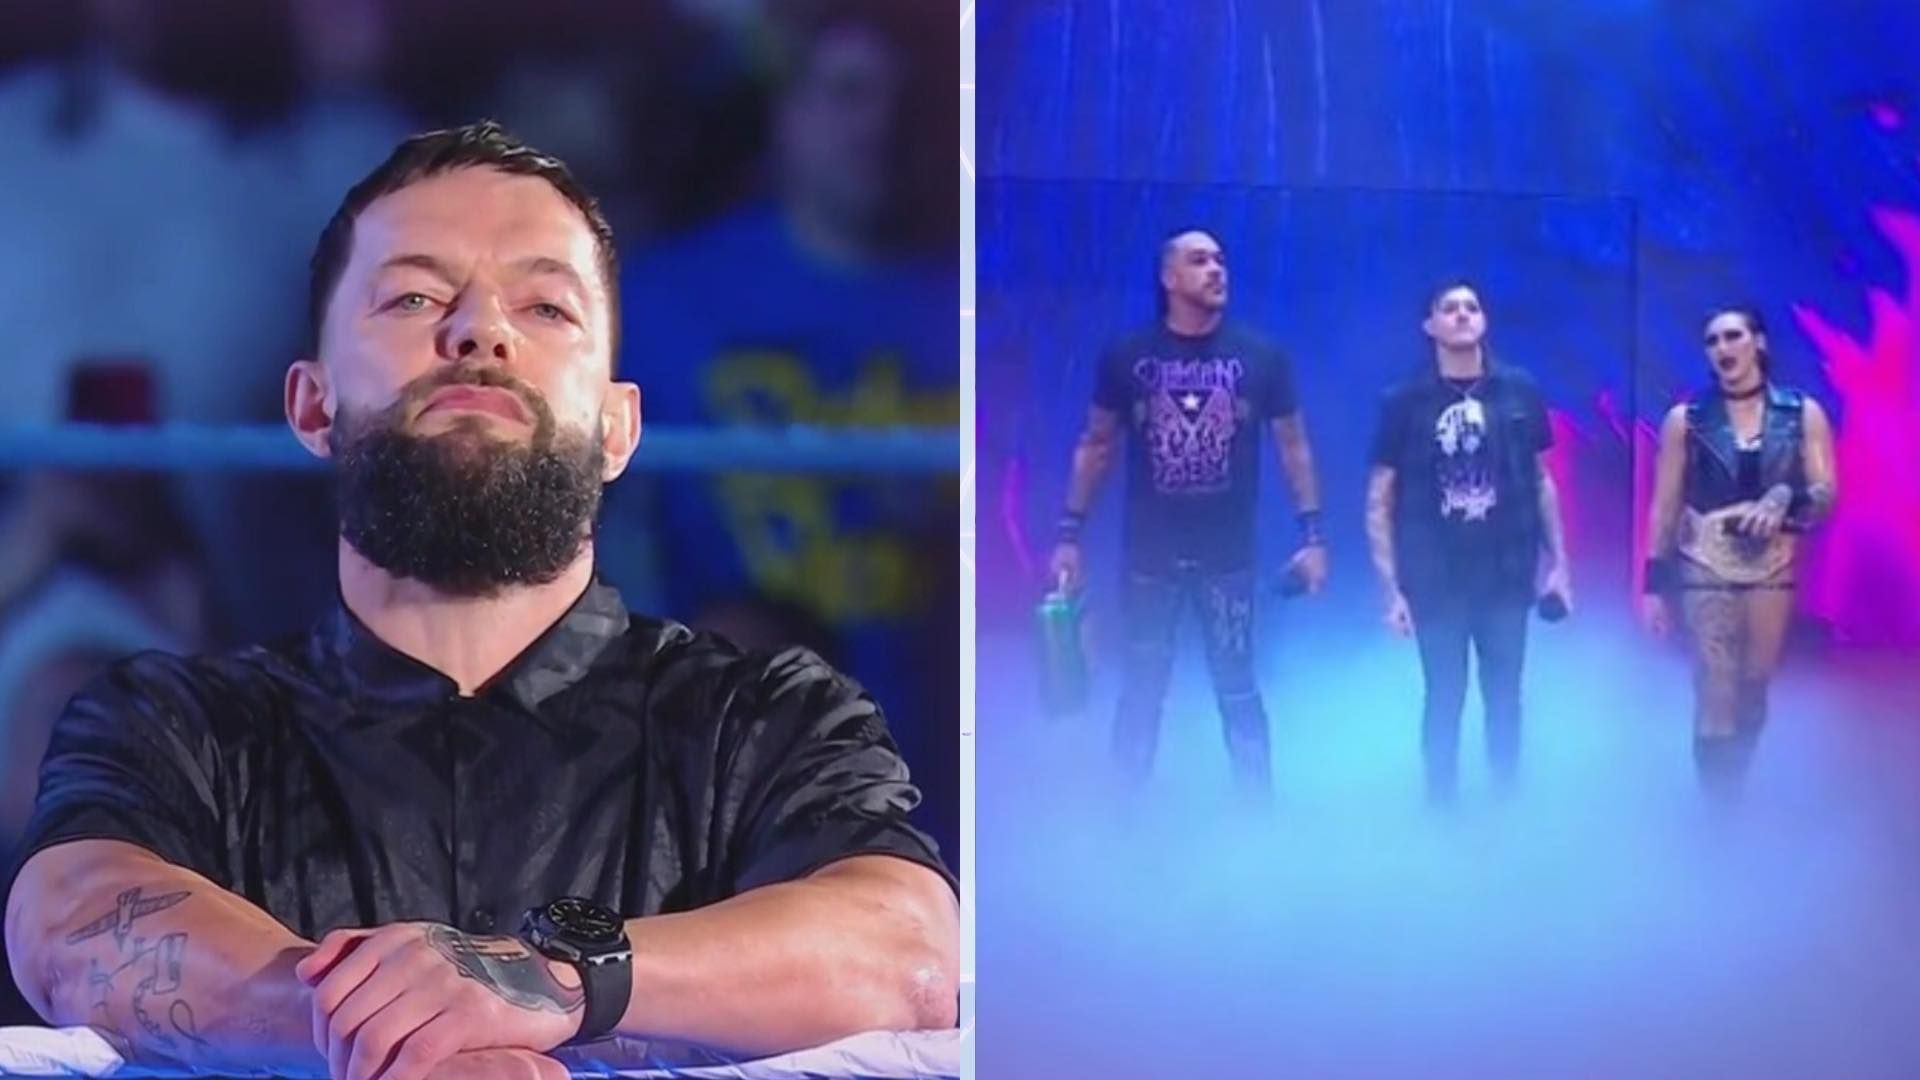 Finn Balor and the Judgment Day members have been invited to WWE show.